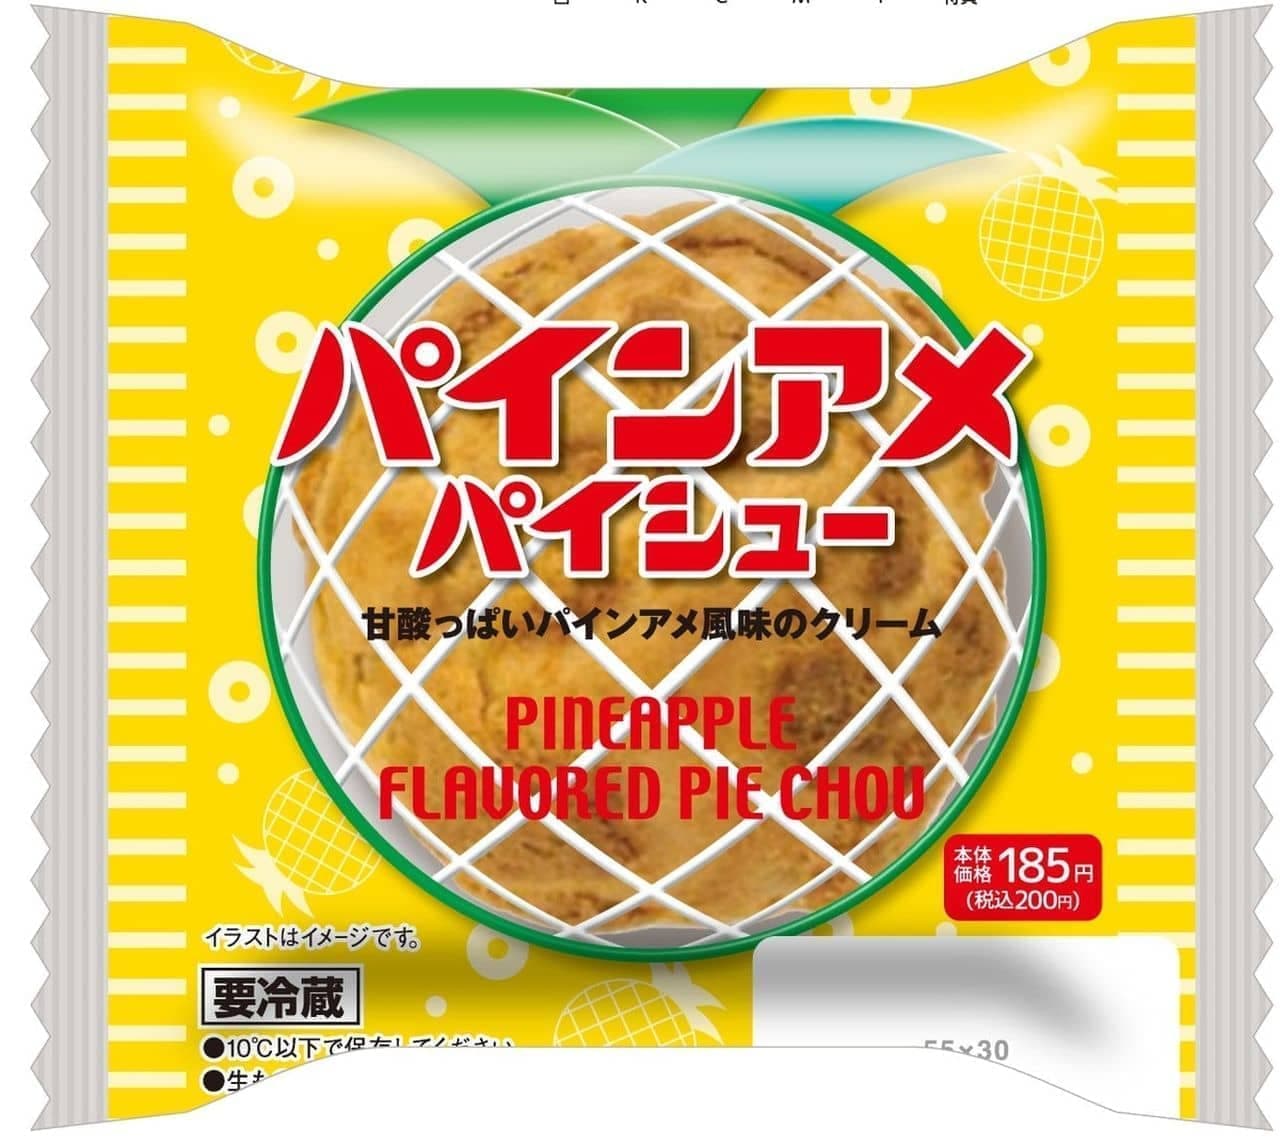 LAWSON "Pineapple Candy Pie Puffs